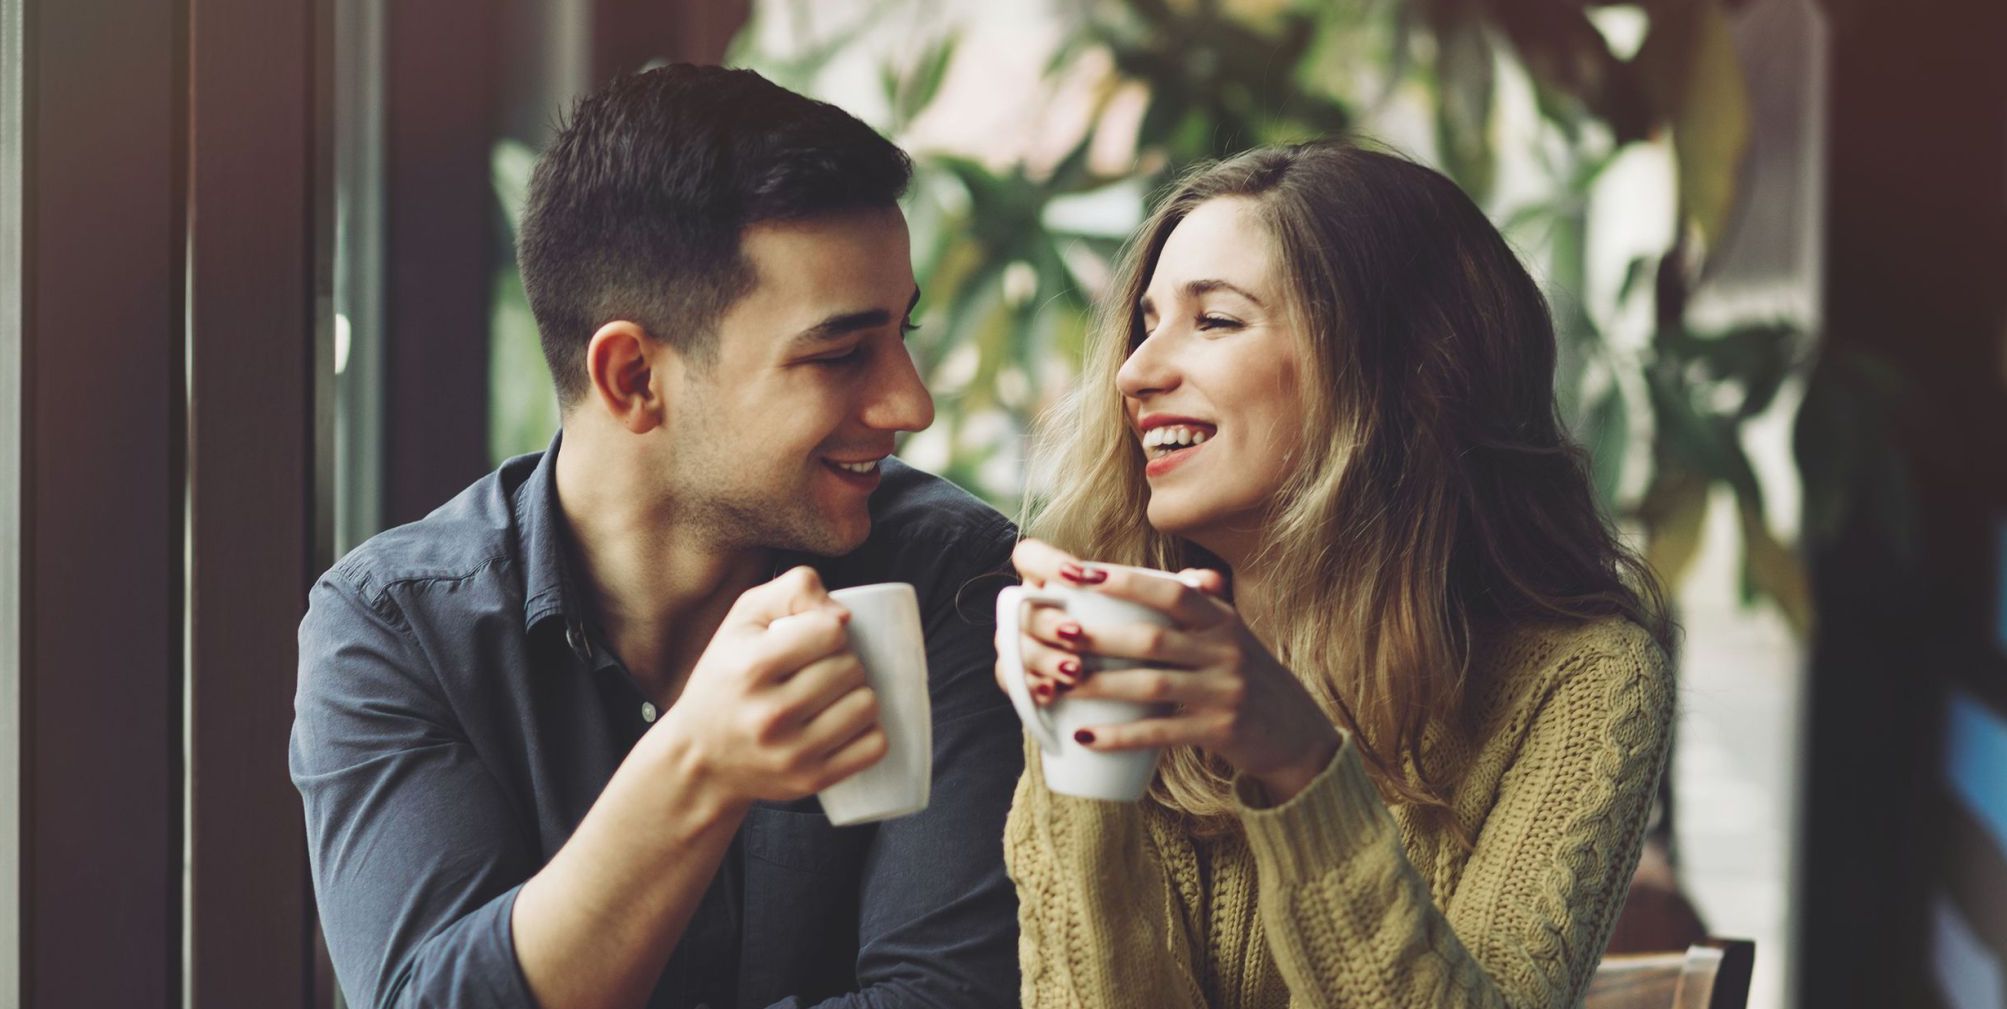 50766349 - couple in love drinking coffee and have fun in coffee shop. love concepts. vintage effect style picture